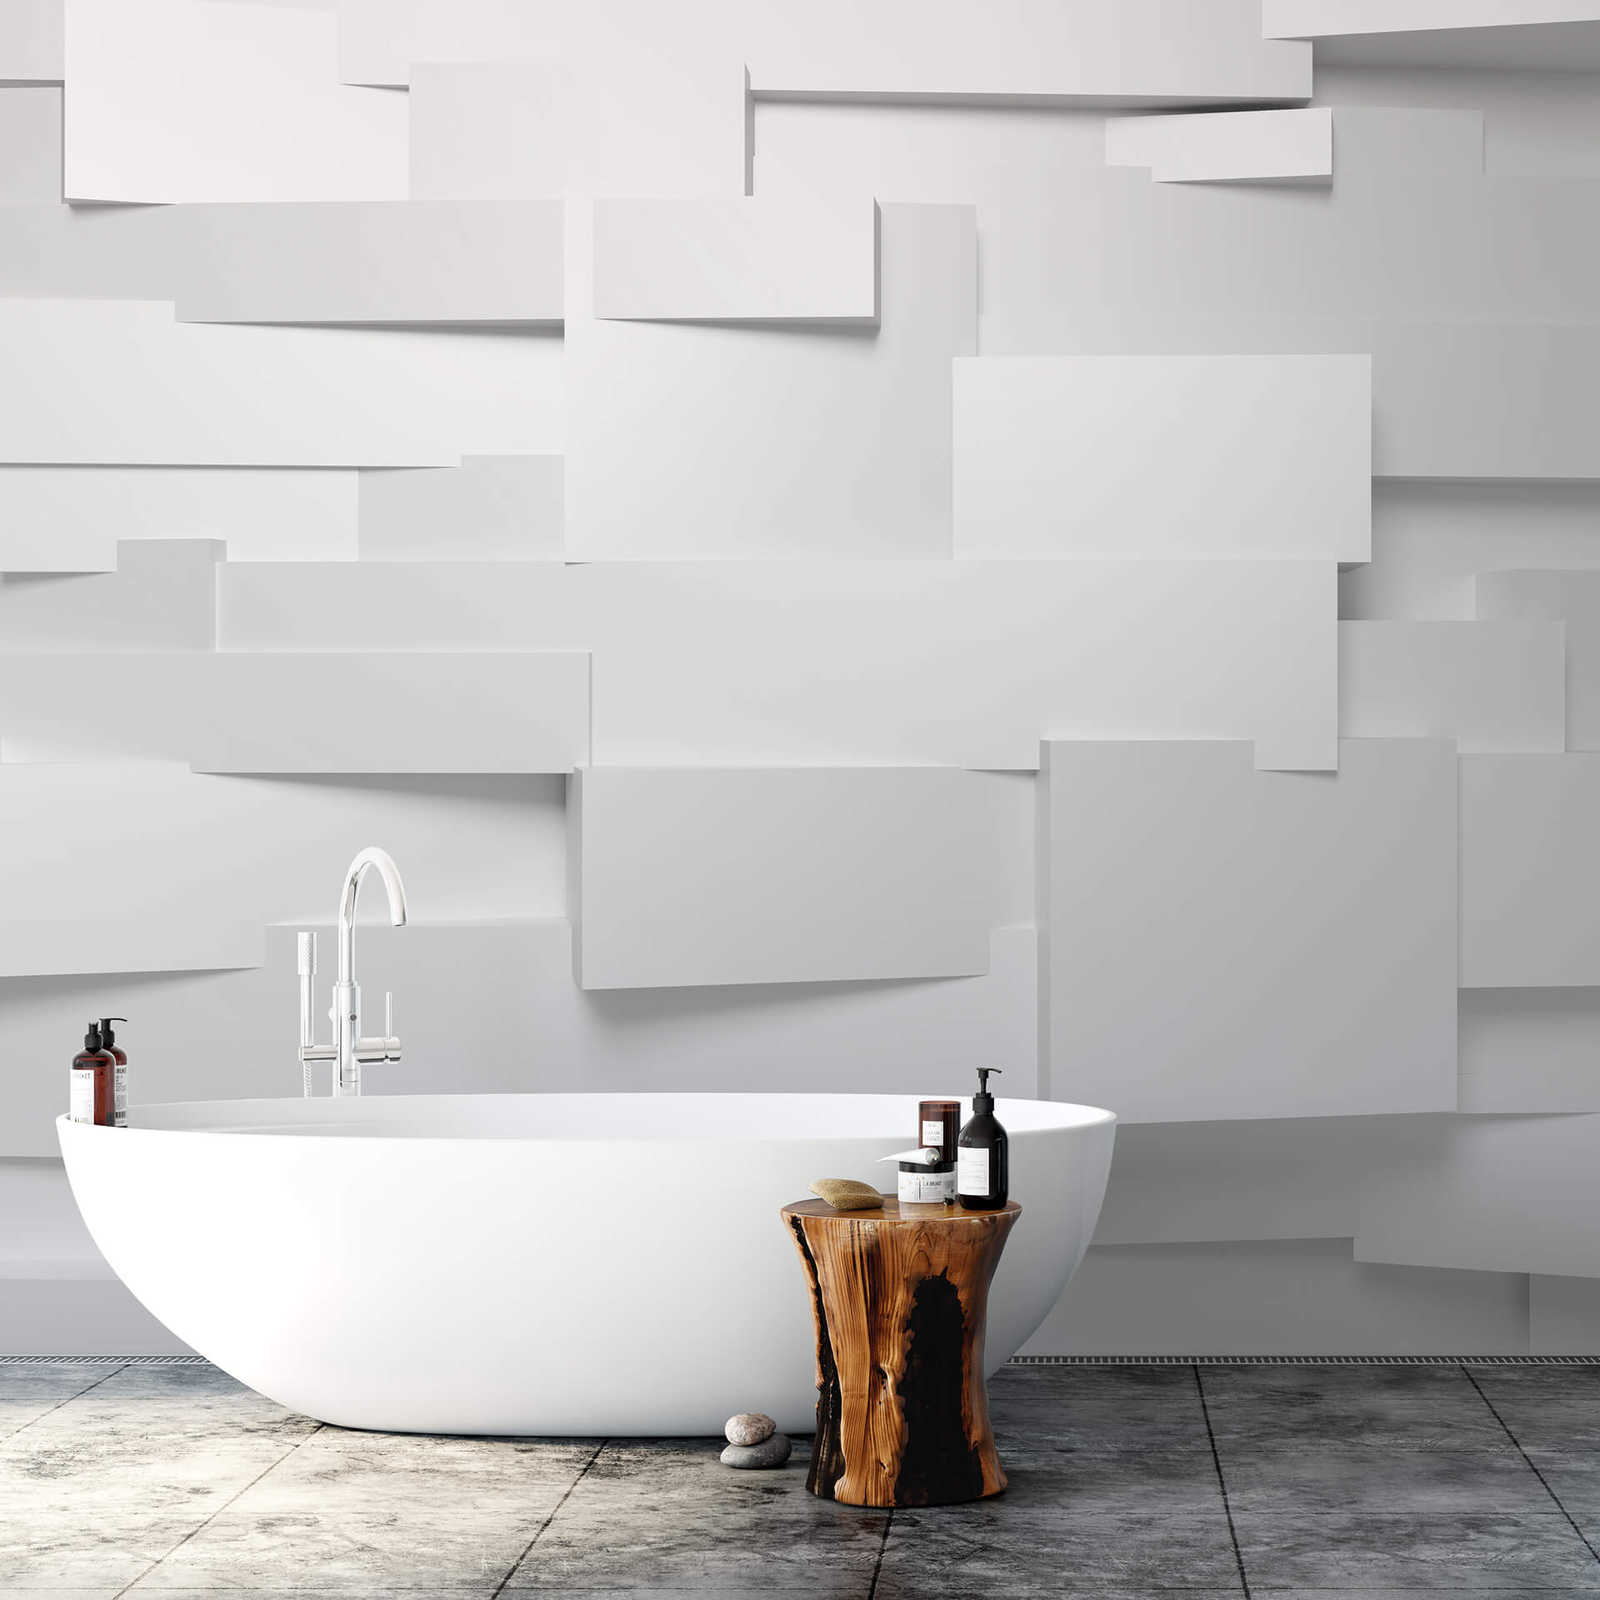             3D wall mural with modern graphic design - white, grey
        